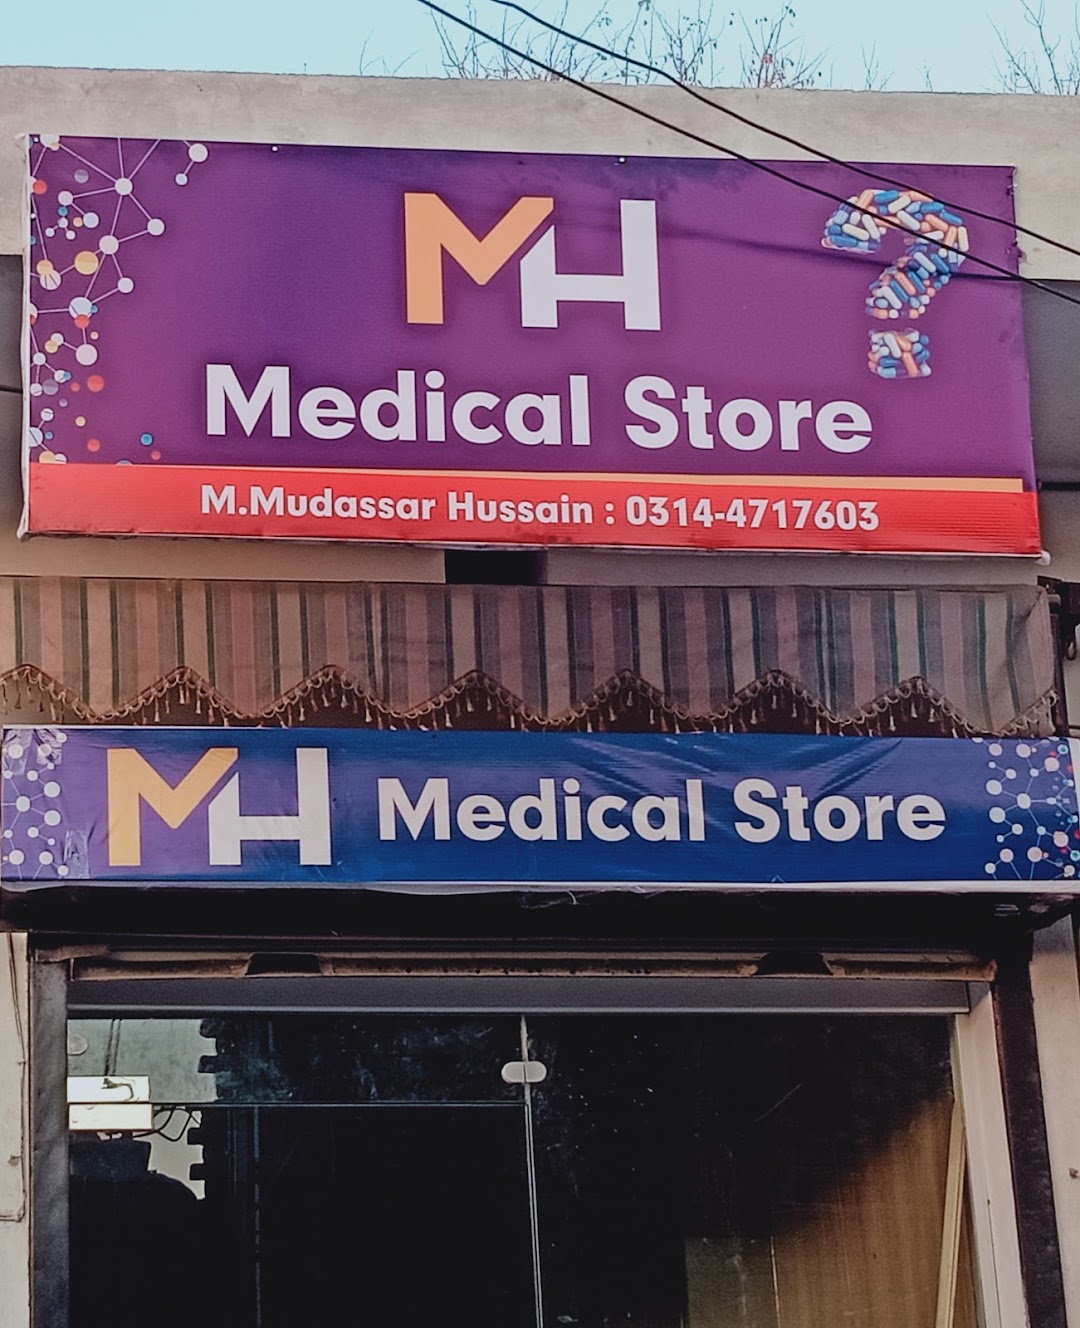 MH Medical Store